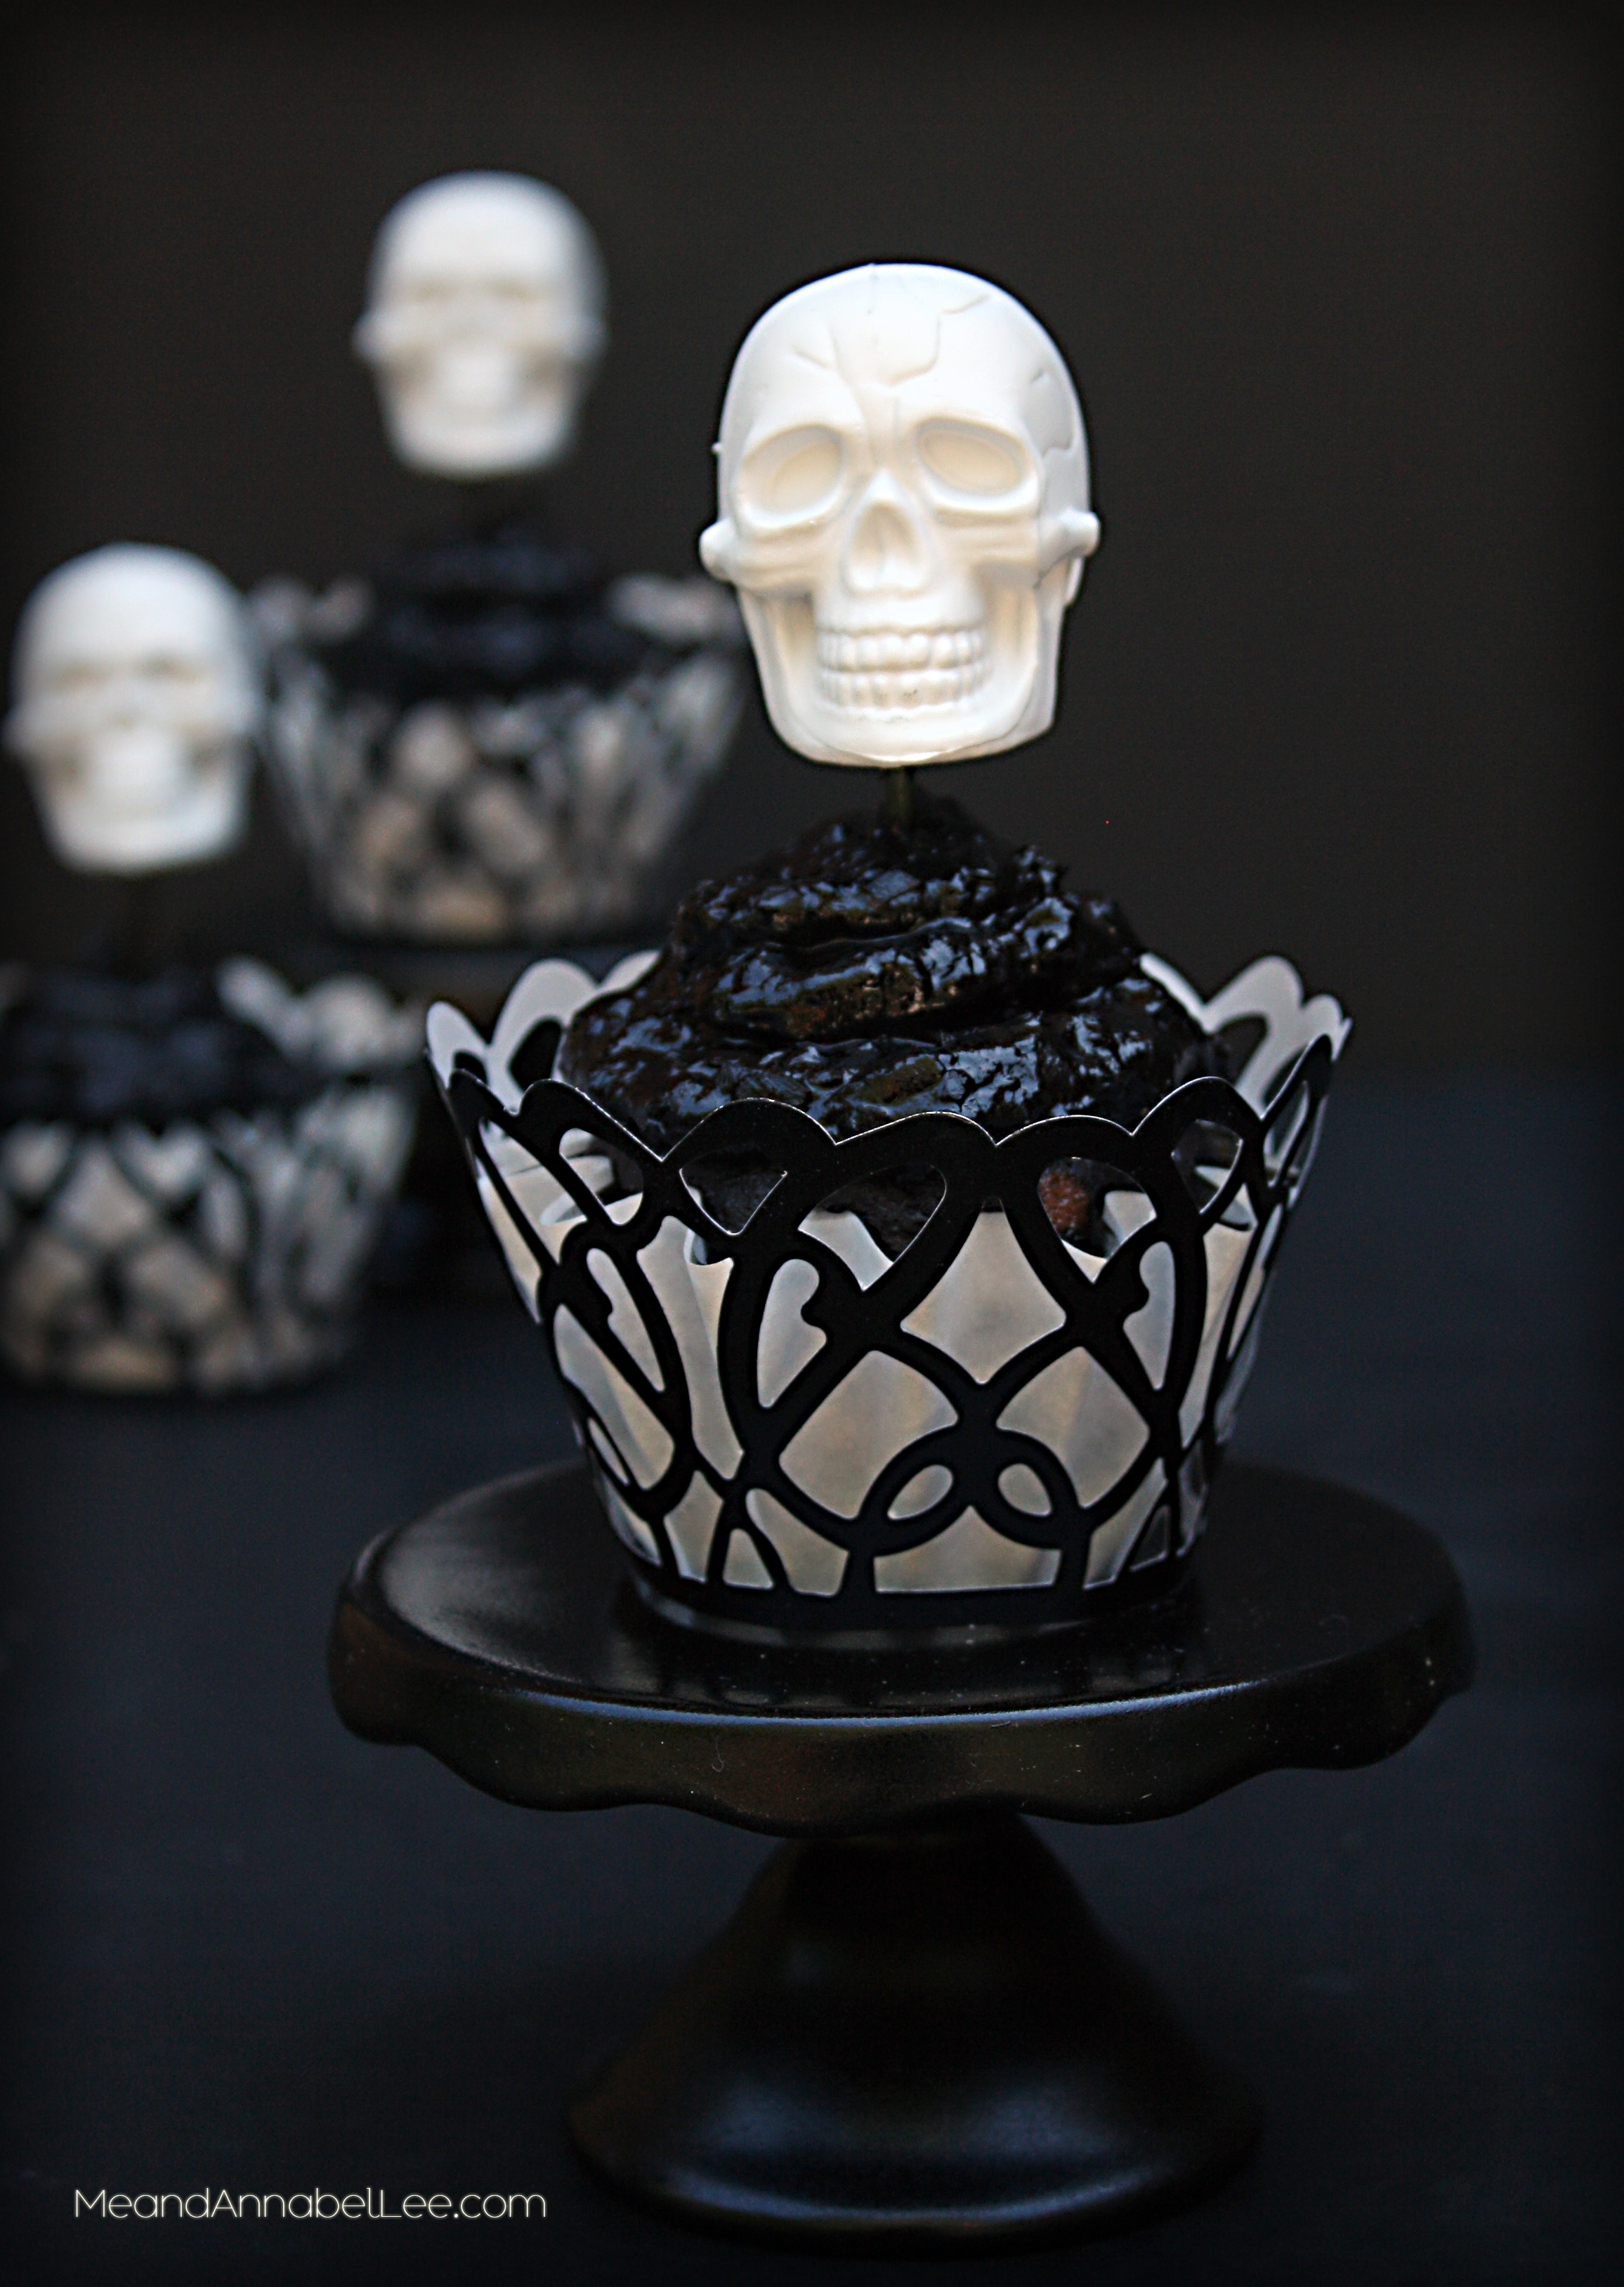 Skull Cupcakes - DIY Skull Toppers | Black Cupcakes | Halloween Treats | Gothic Baking | www.MeandAnnabelLee.com